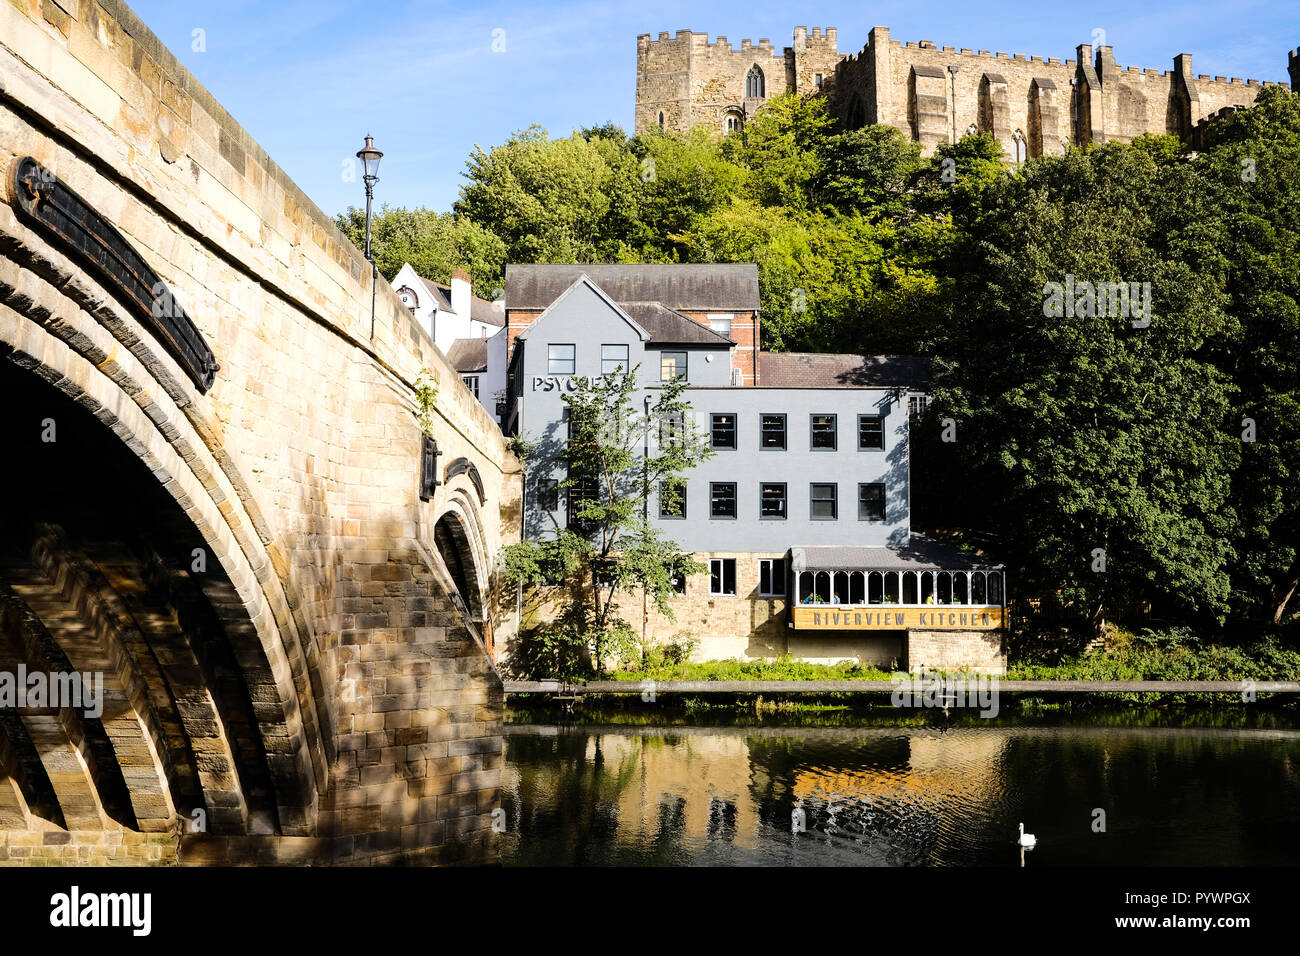 Durham Castle and River in the City Centre, England, UK Stock Photo